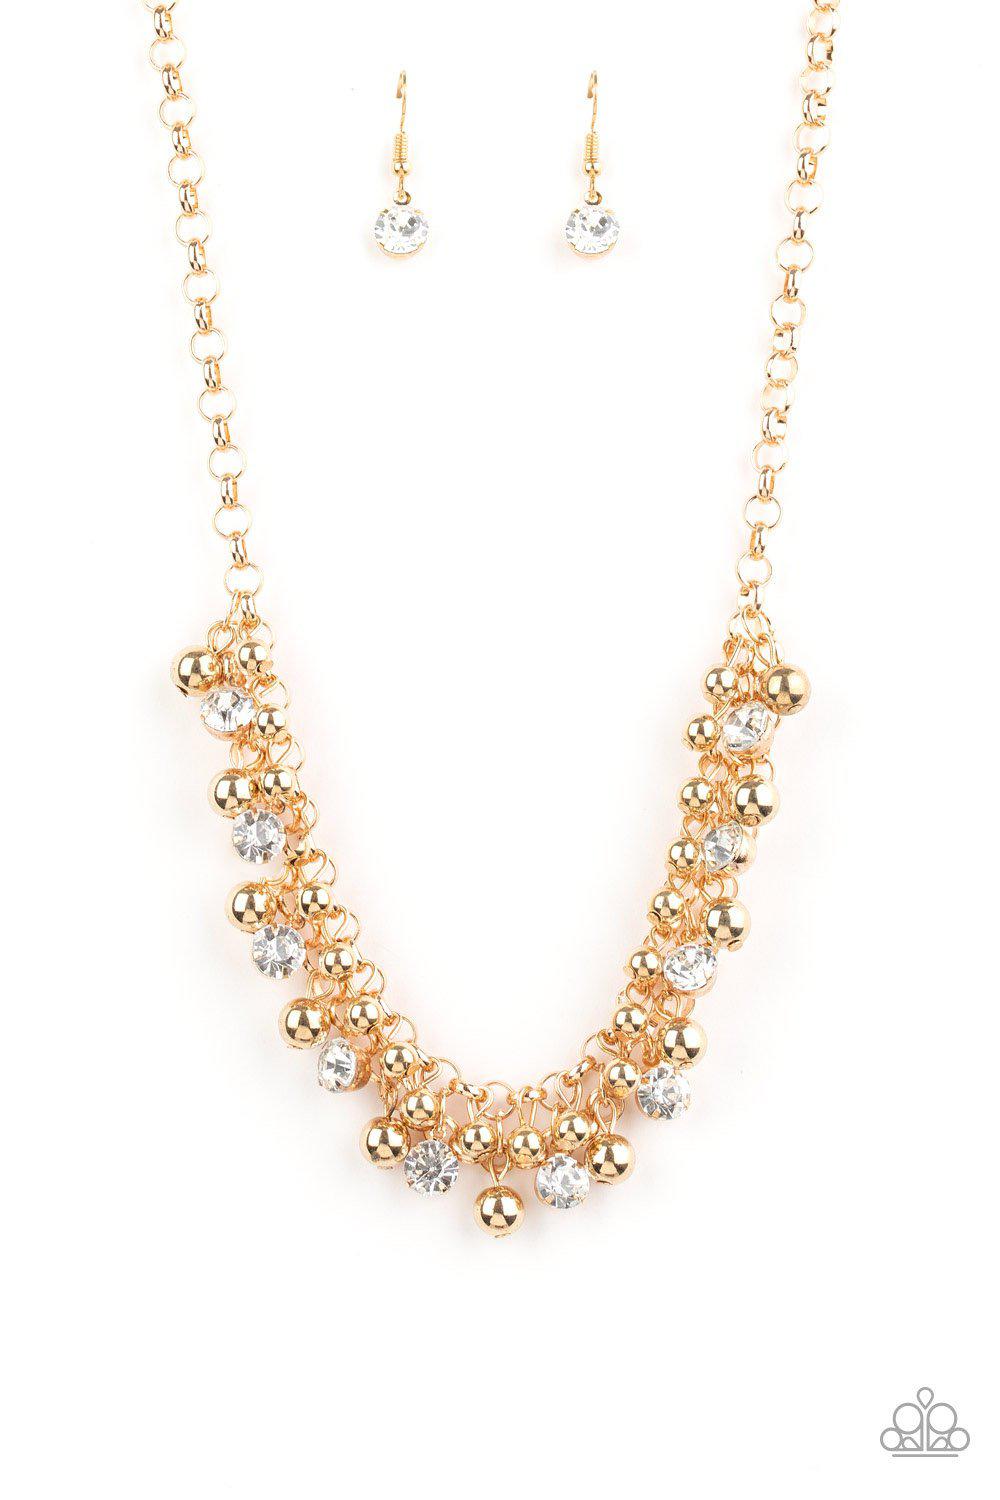 Wall Street Winner Gold and White Rhinestone Necklace - Paparazzi Accessories - lightbox -CarasShop.com - $5 Jewelry by Cara Jewels